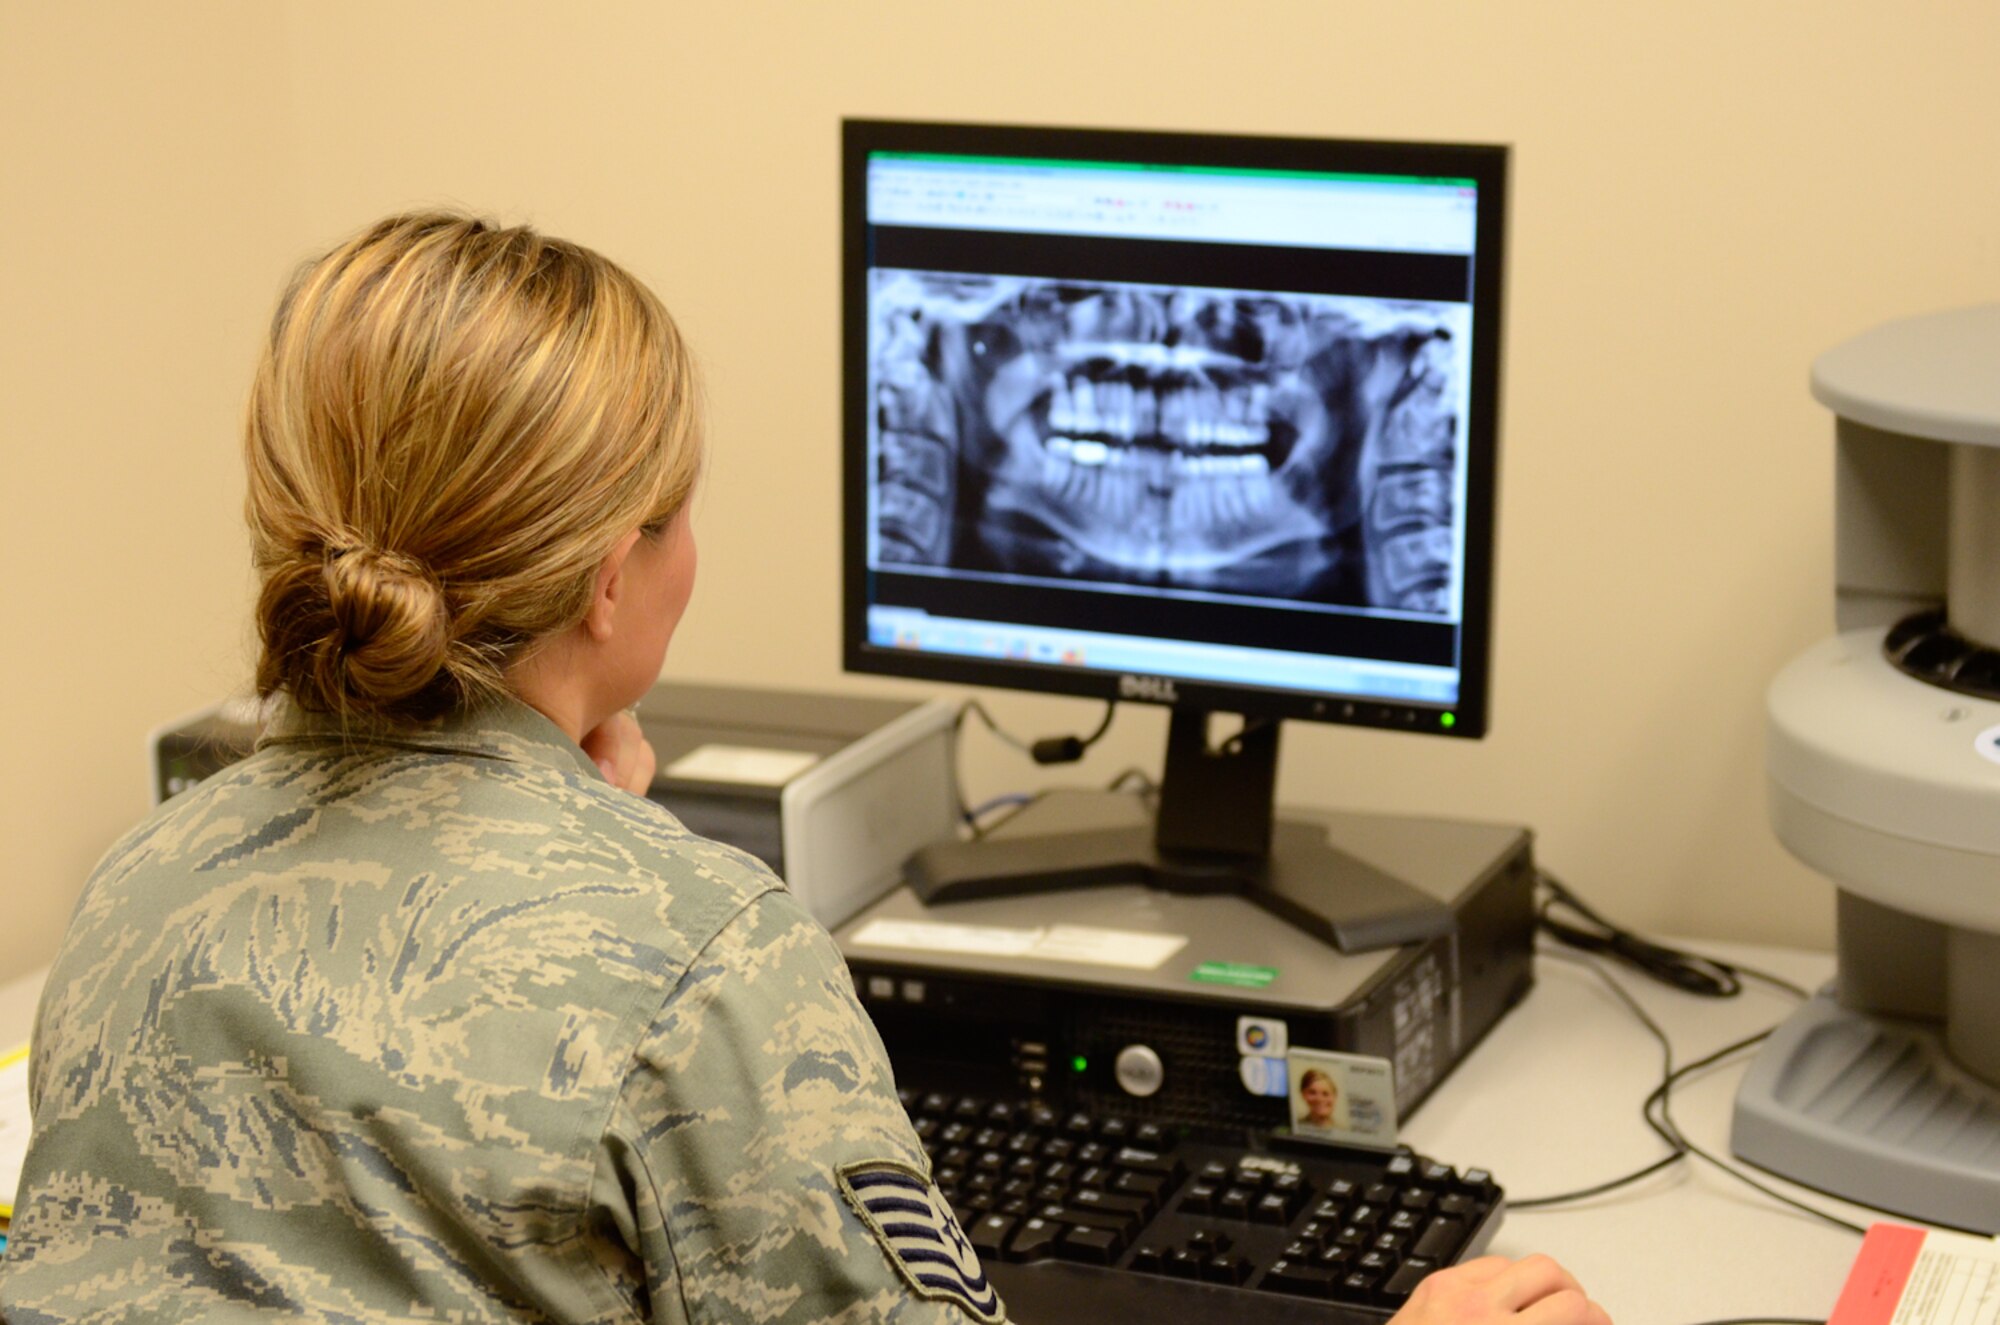 U.S. Air Force Tech. Sgt. Carly Edwards, a dental technician with the 139th Medical Group, Missouri Air National Guard, reviews dental images at Rosecrans Air National Guard Base, Mo., July 24, 2013.  The Medical Group restored function to the x-ray machine this Spring after it being non-functional for more than two years. (U.S. Air National Guard photo by Tech. Sgt. Theo Ramsey/Released)